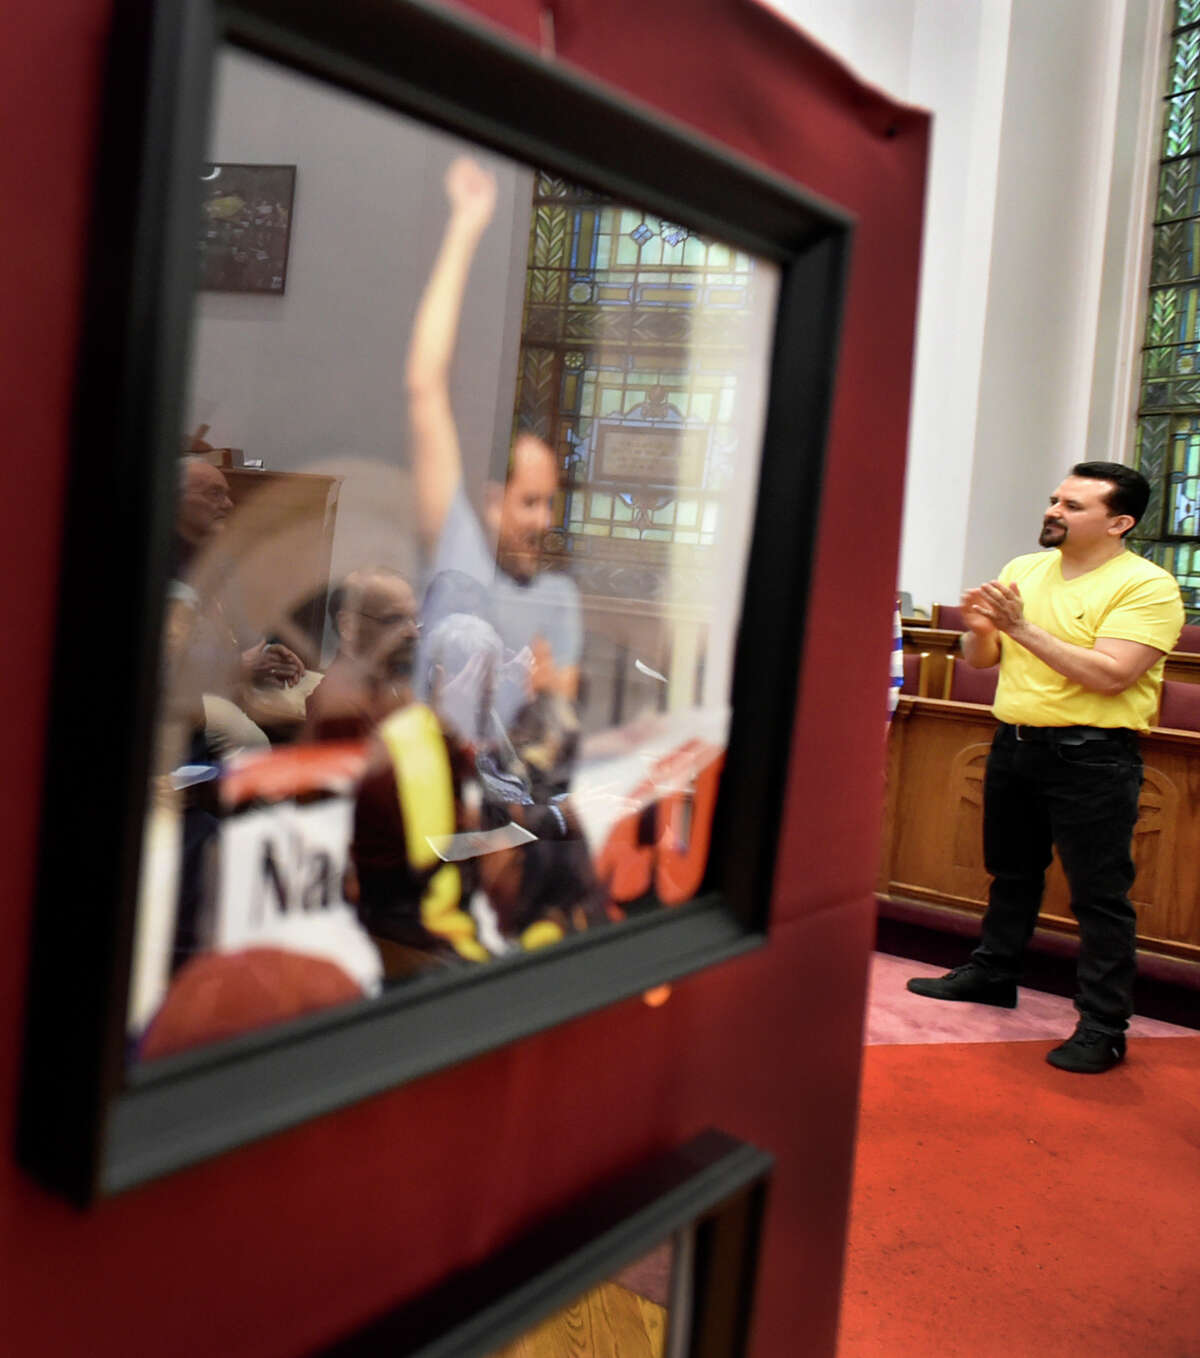 New Haven, Connecticut - Saturday, April 13, 2019: Nelson Pinos, an undocumented immigrant from Ecuador facing deportation, with his 500th day in sanctuary Saturday at the First and Summerfield Church in New Haven listens to a speaker during the opening of a photographic exhibition fundraising event Saturday evening for him and his family at the church.The photo exhibit documents Pinos, in sanctuary in New Haven since November 30, 2017, and Sujitno Sajuti, in sanctuary in Meriden since October 10. 2017. Pinos, a resident of New Haven, has lived in the U.S. since 1992. He is married and the father of three American citizen children